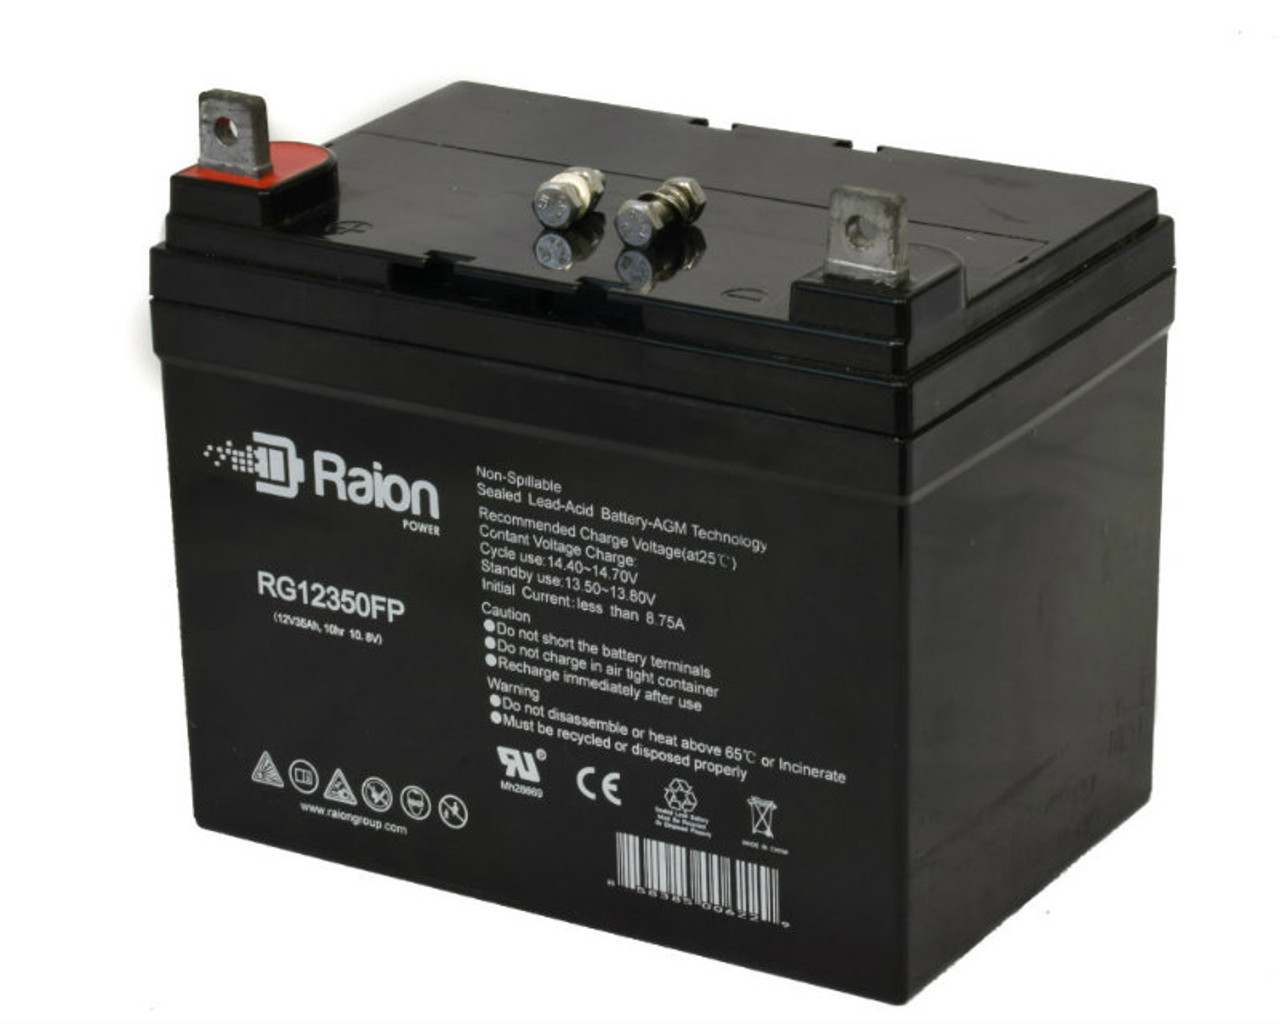 Raion Power Replacement 12V 35Ah Battery for BSB DC12-35 - 1 Pack